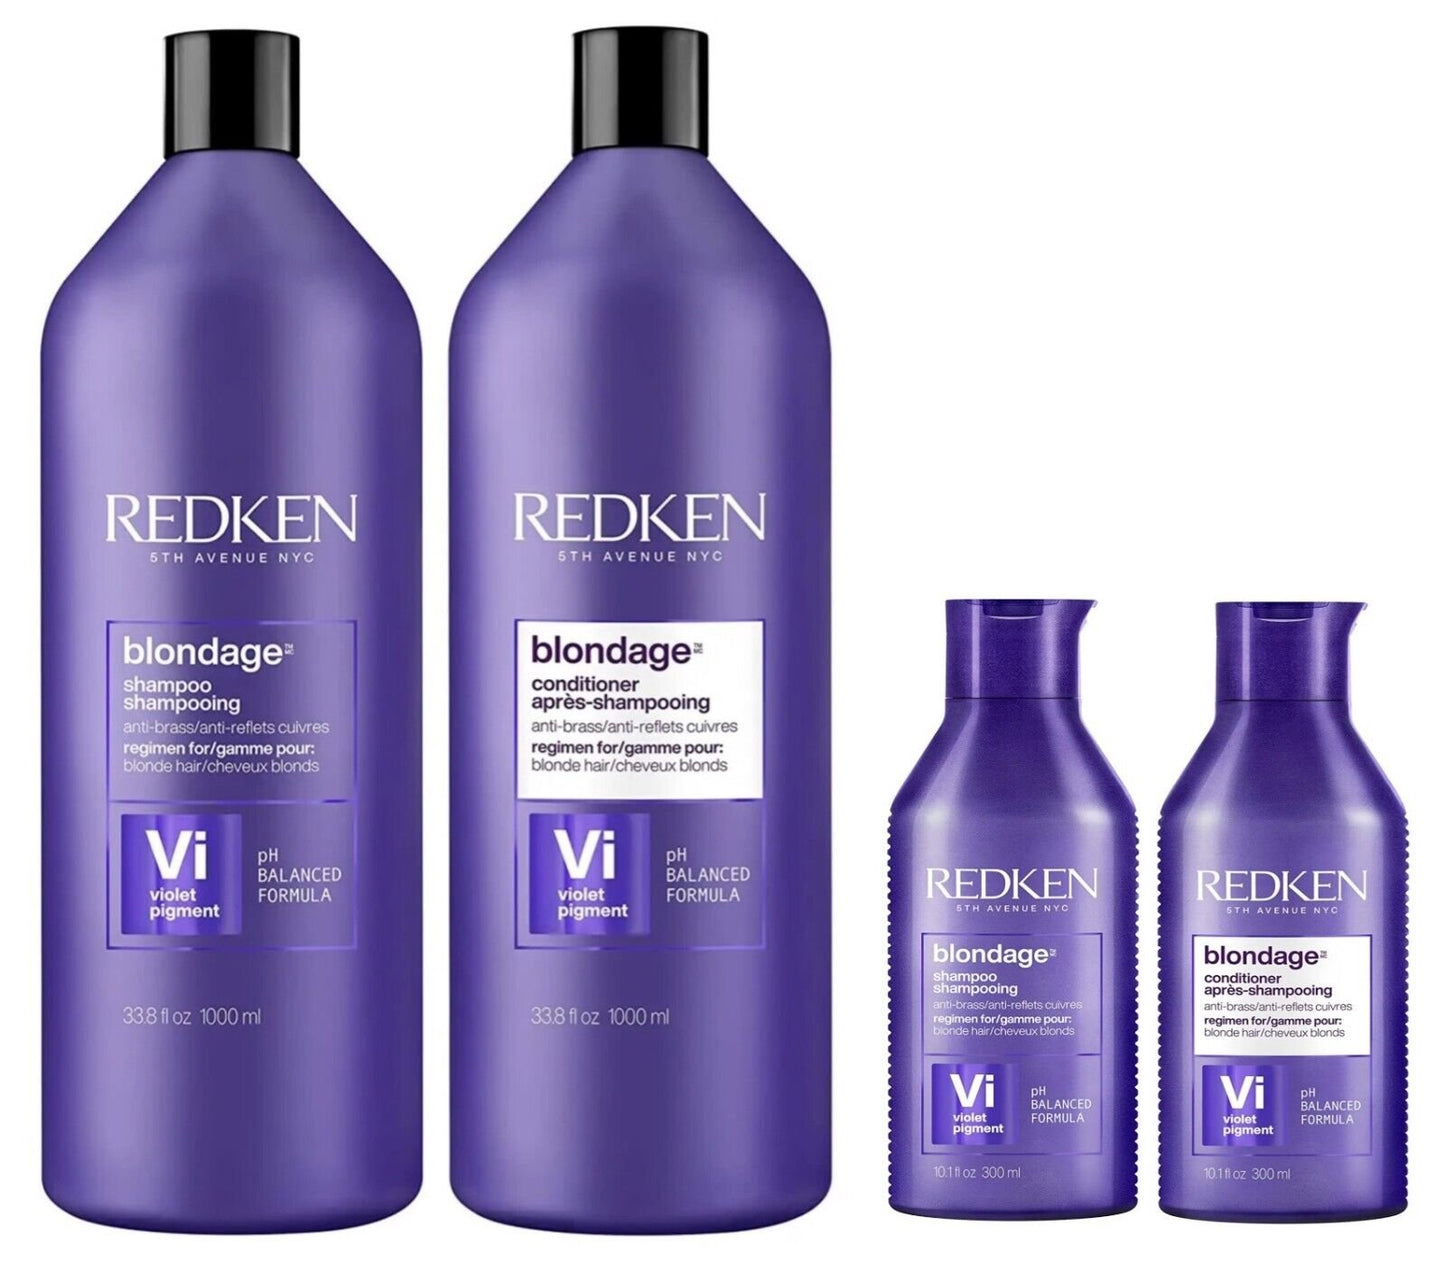 ($136) Redken Color Extend Blondage Shampoo and Conditioner 10.1 and 33.8 fl oz